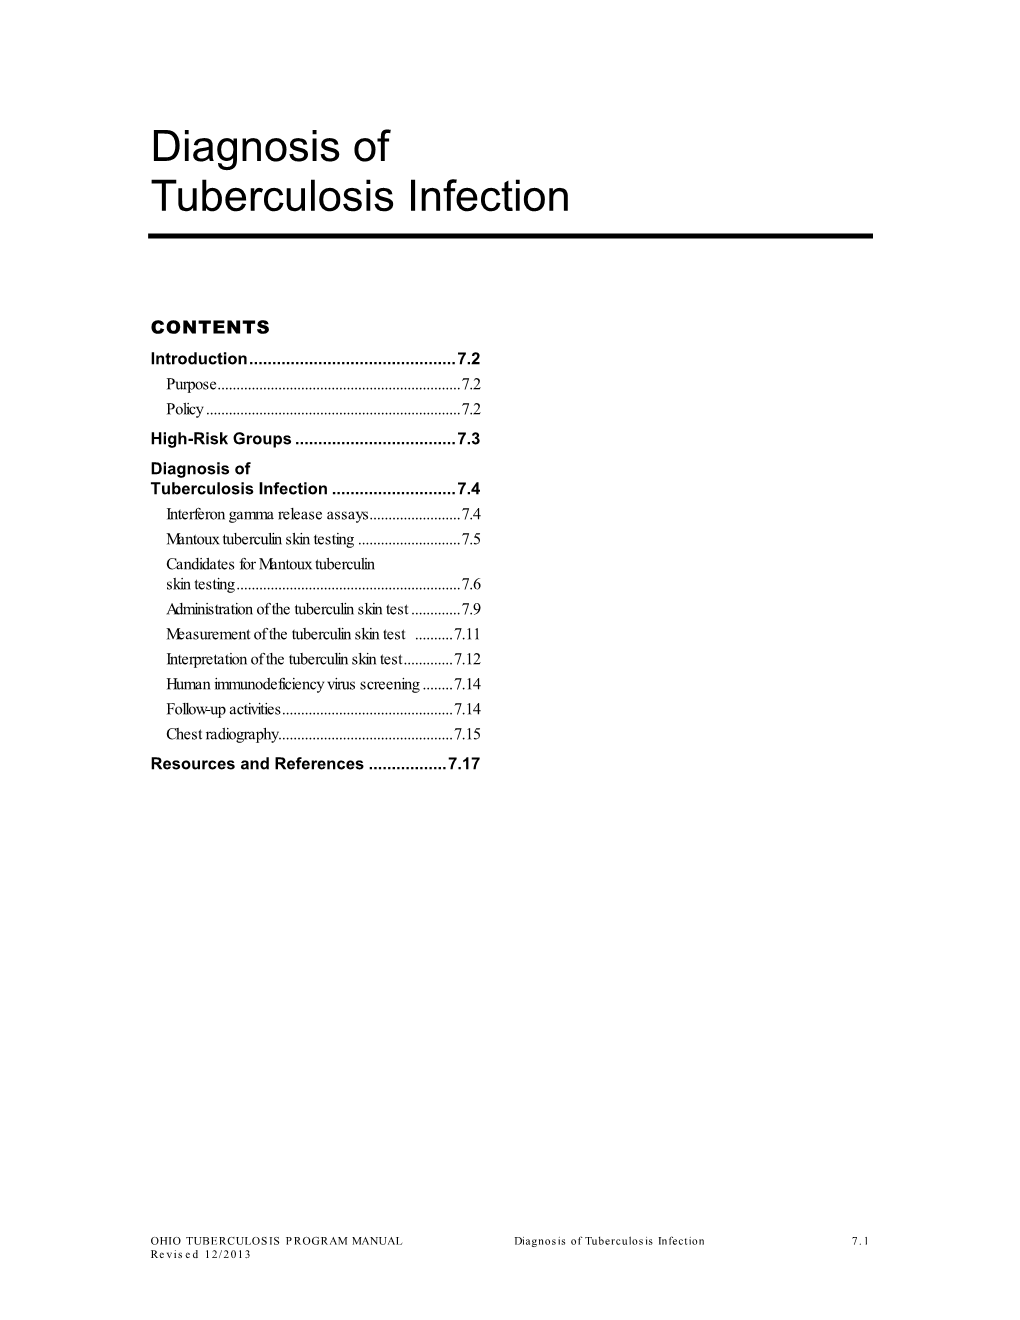 Diagnosis of Tuberculosis Infection